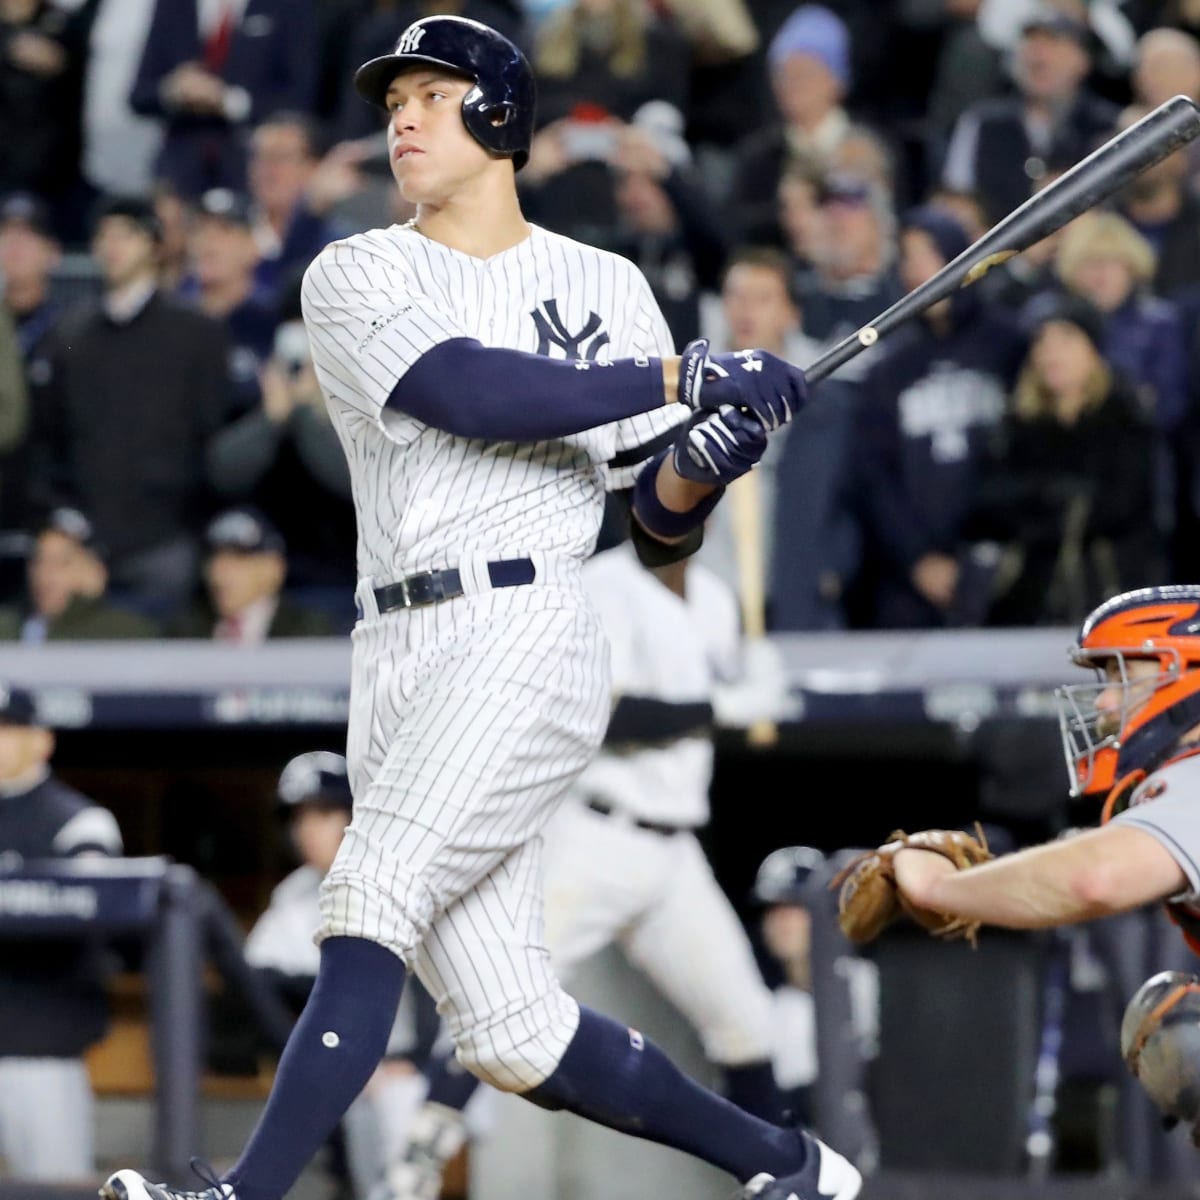 ALCS results 2017: Yankees beat Astros 8-1 in Game 3 